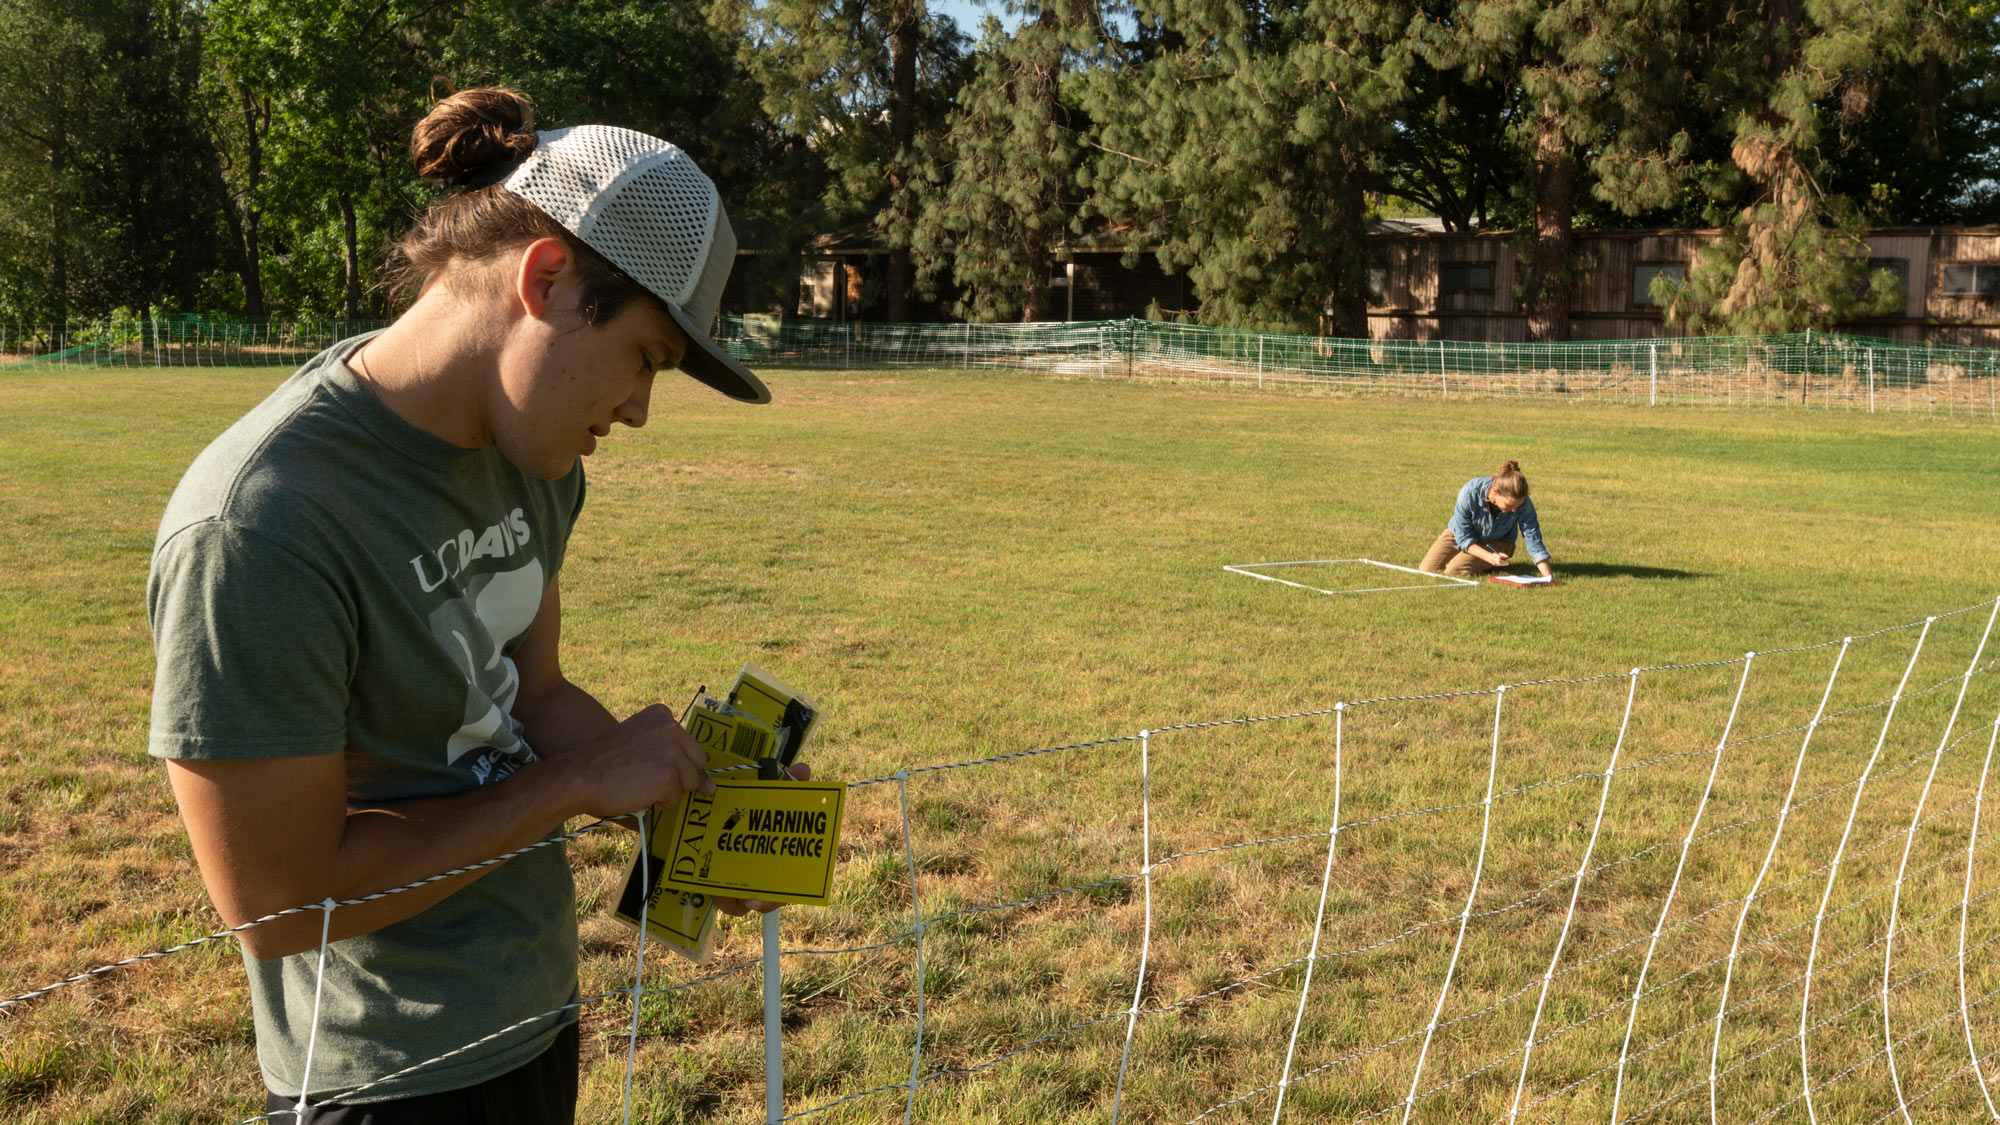 Student hangs "electric fence" sign while faculty member measures grass.